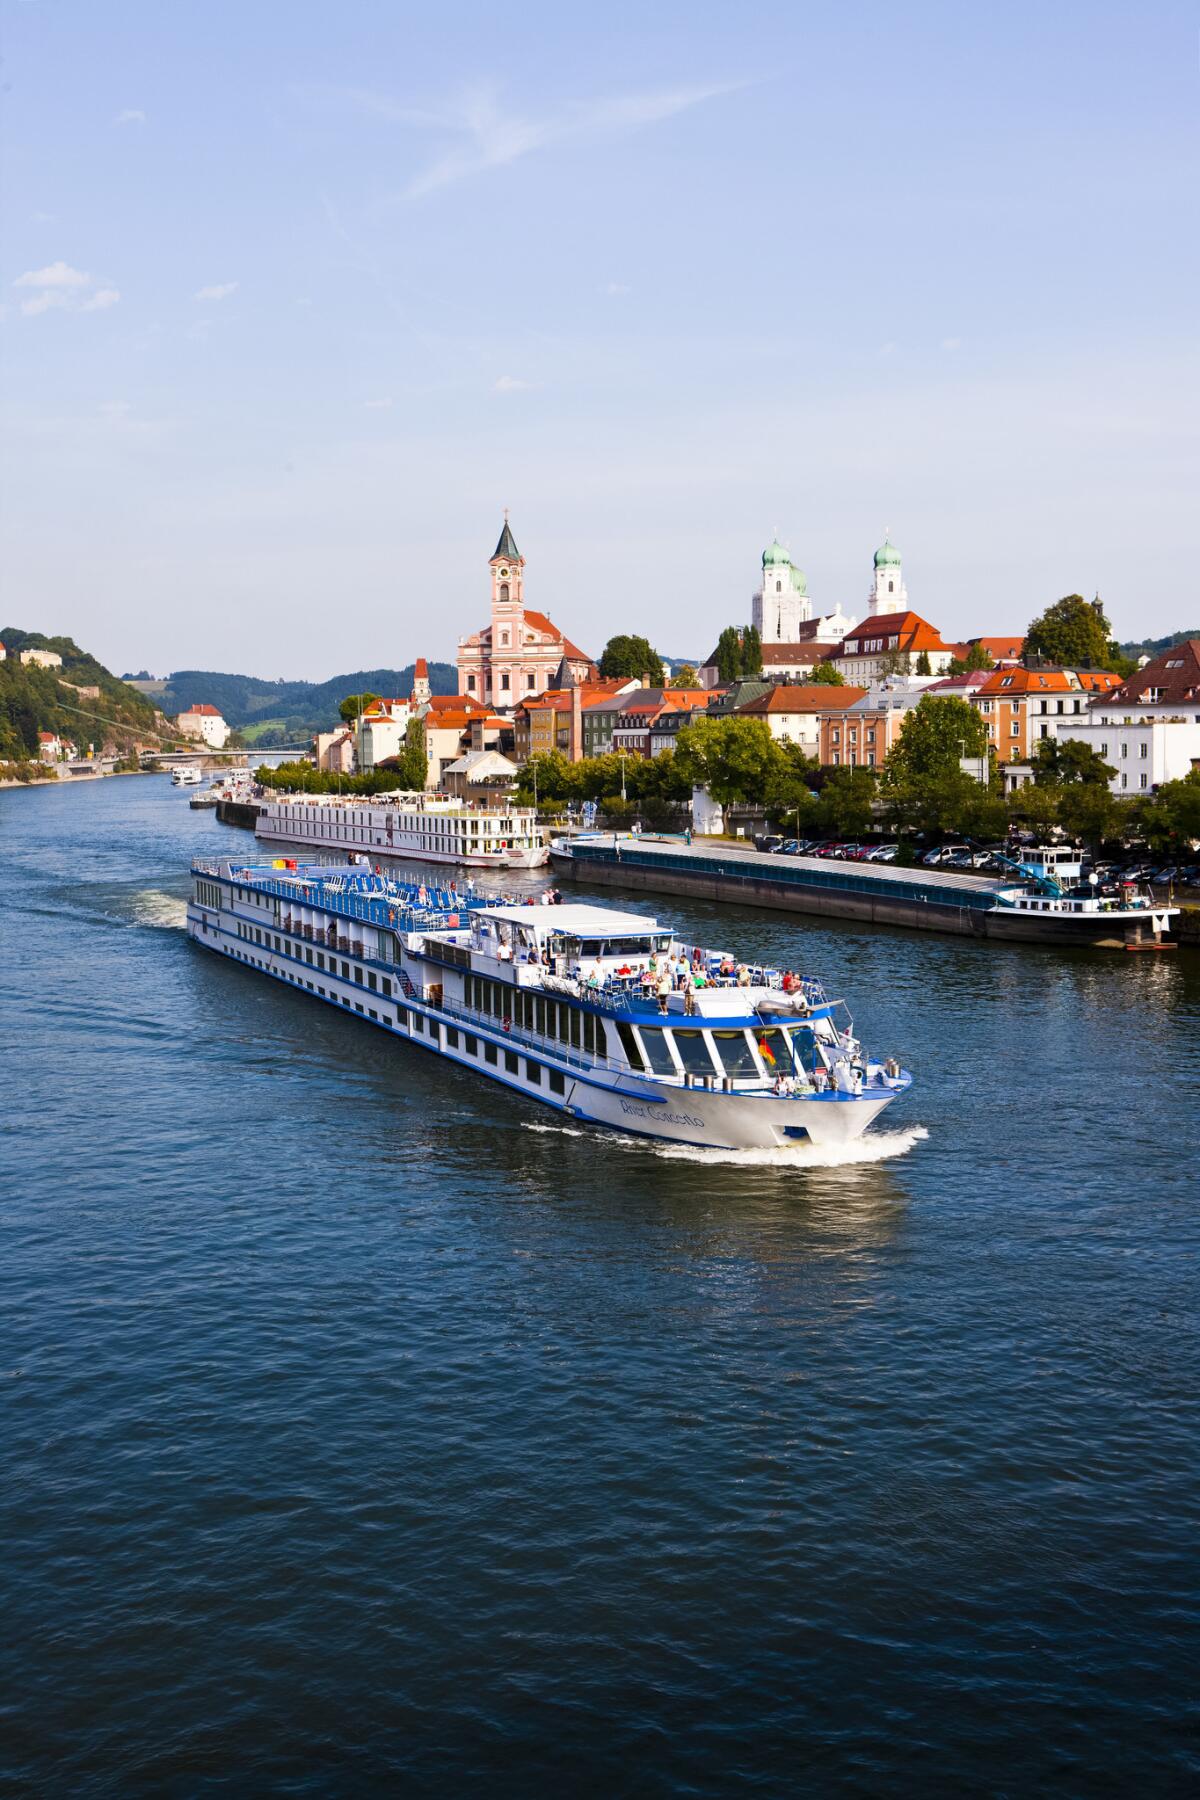 A Danube River cruise takes in the sights of Passau, Germany. (Michael Runkel / Robert Harding)